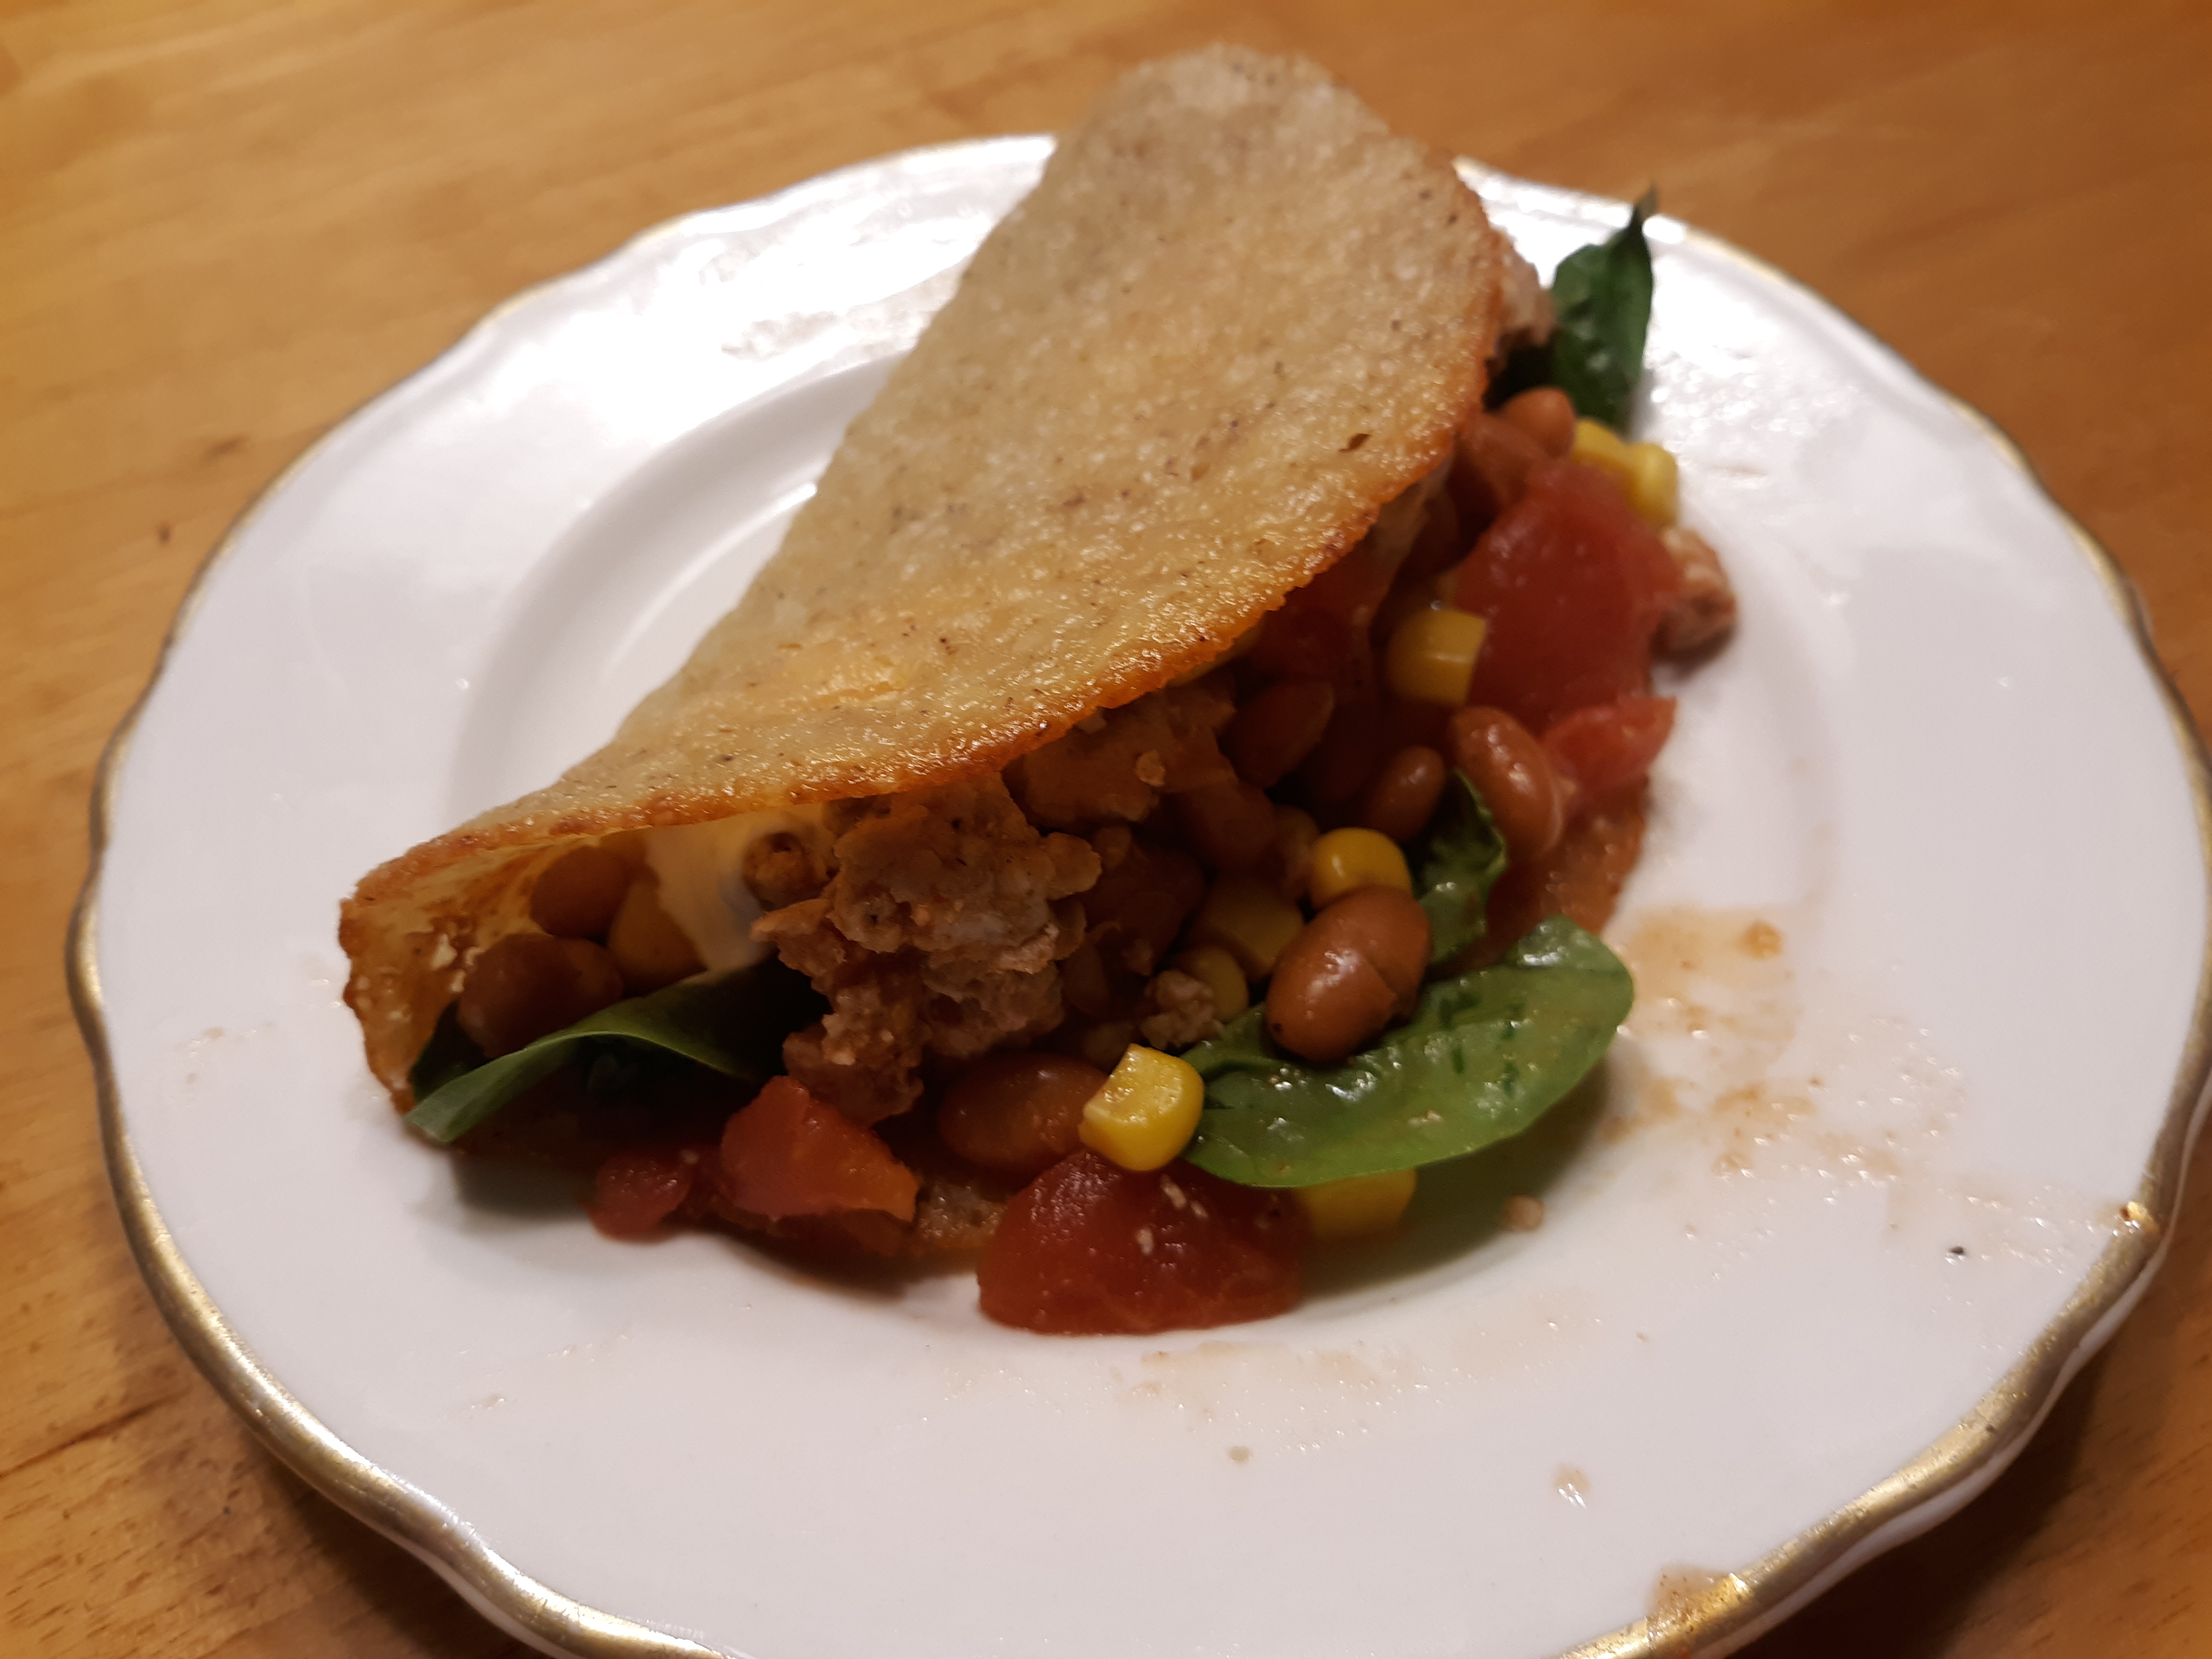 How To Make Low Carb Gluten Free Crispy Taco Shells (Nut Free)